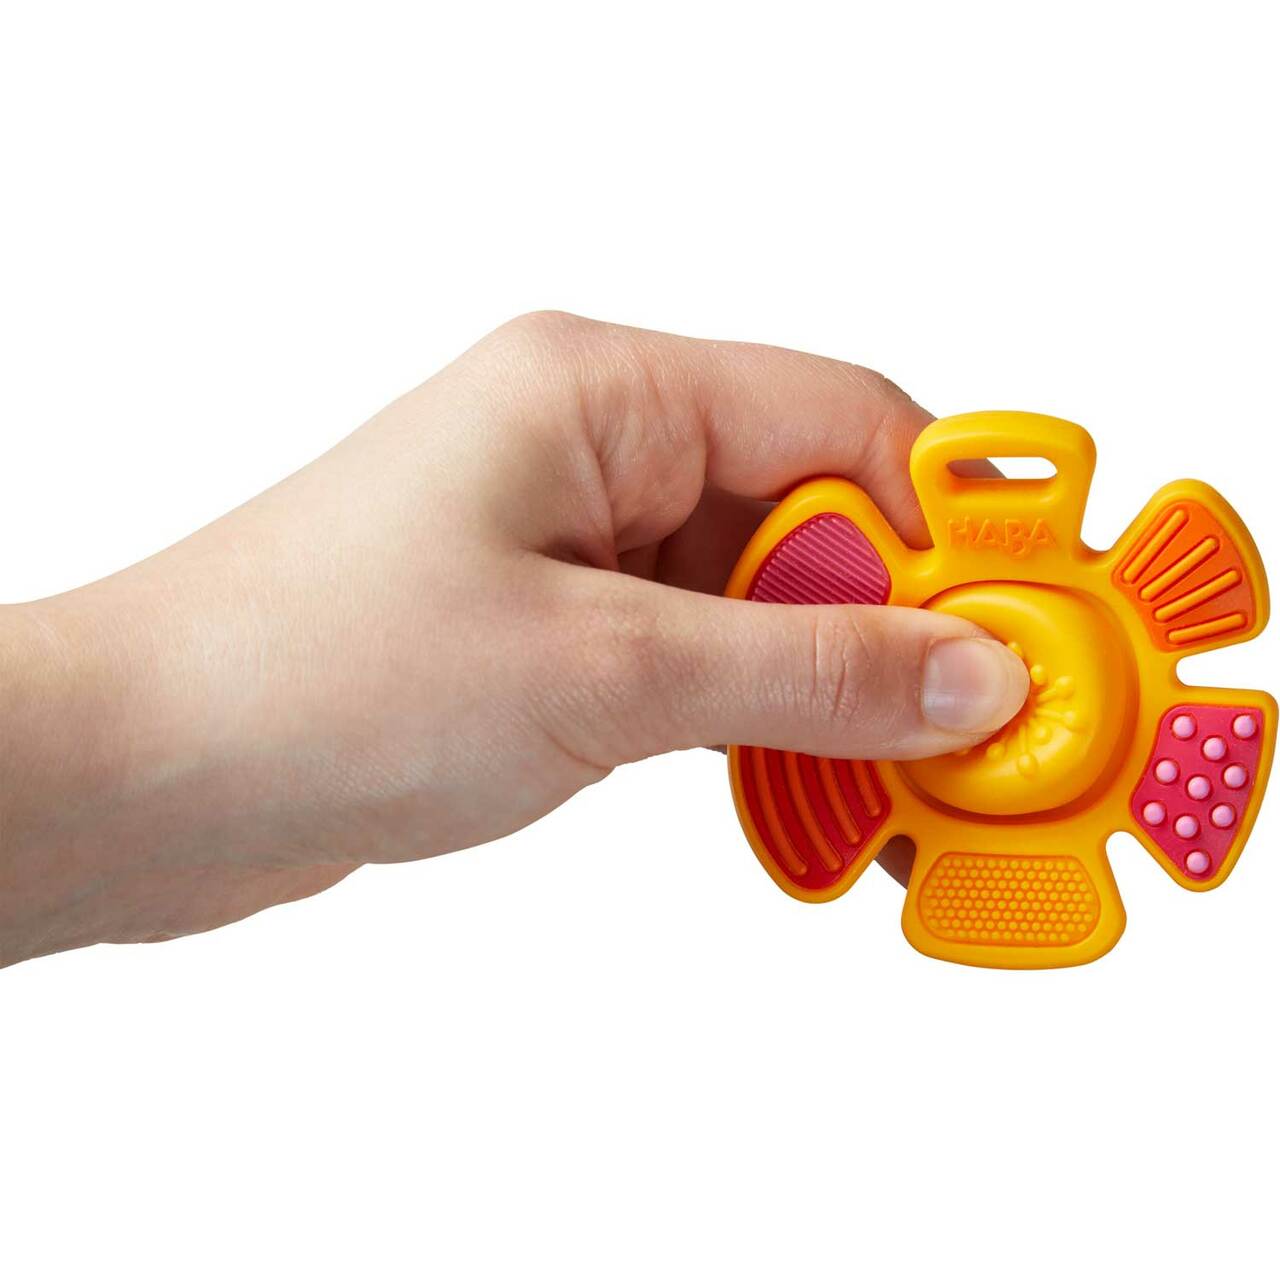 Popping Frog Silicone Teething Toy – Brighten Up Toys & Games